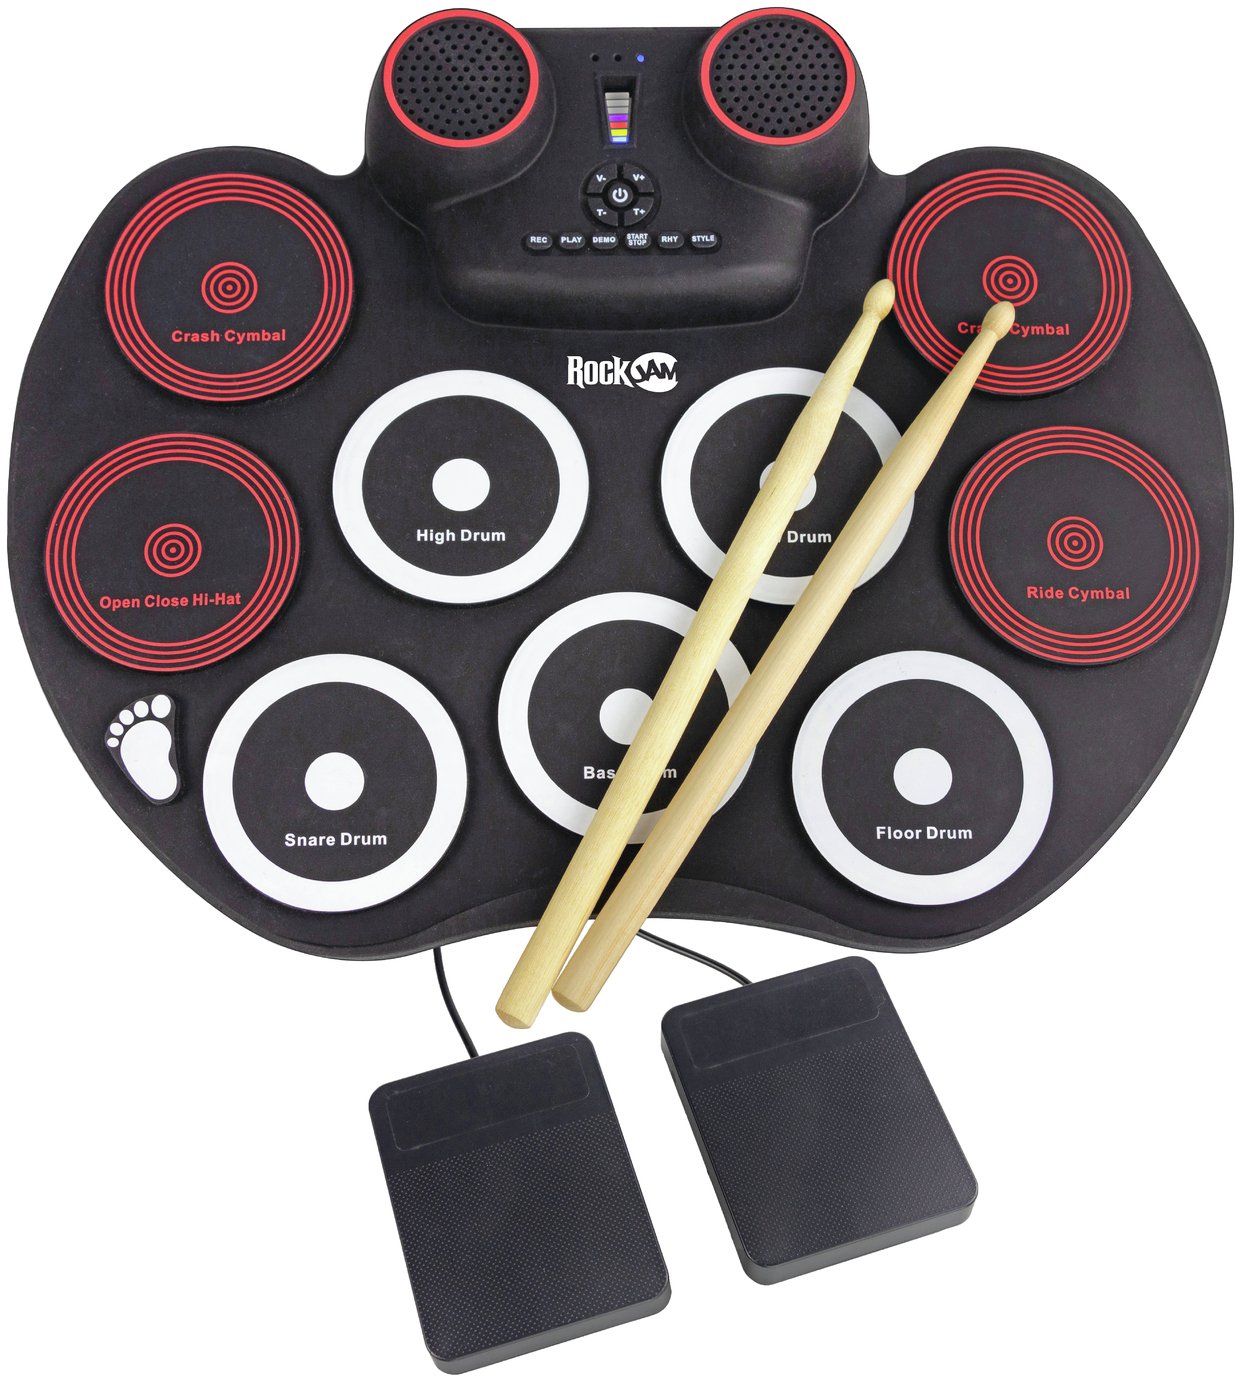 RockJam Portable Rechargeable and Bluetooth Roll Up Drum Kit